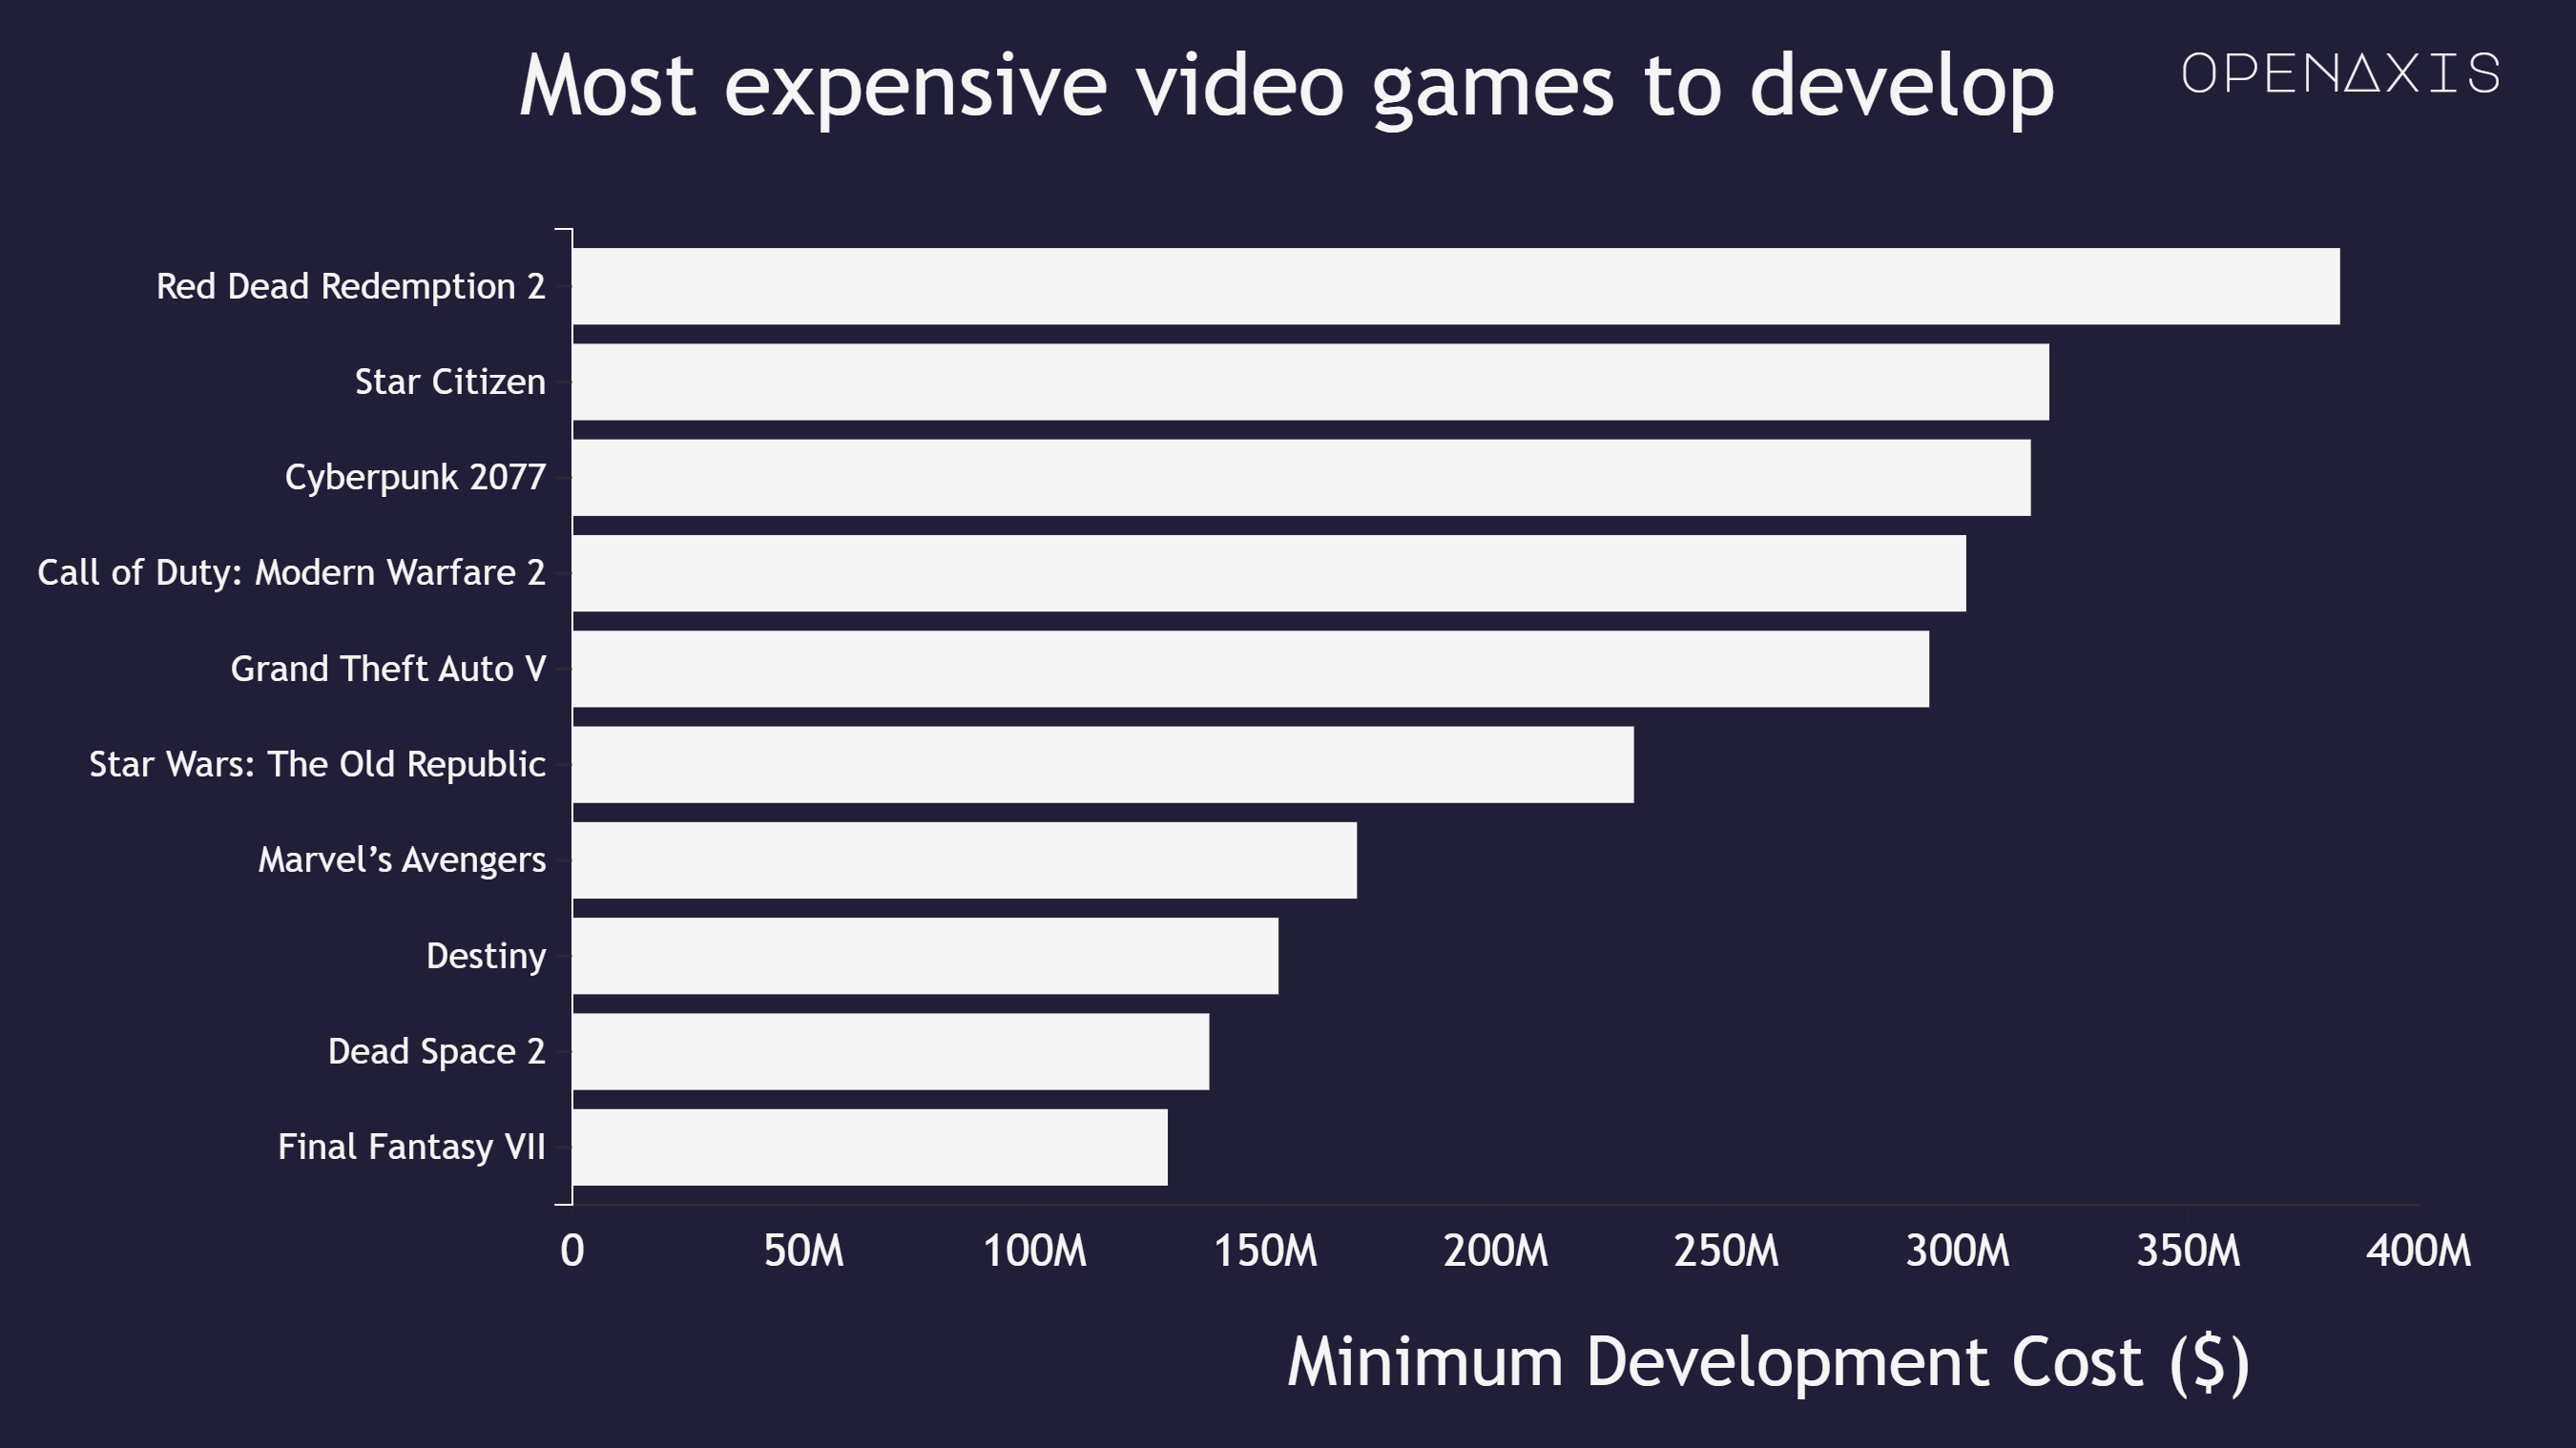 "Most expensive video games to develop"